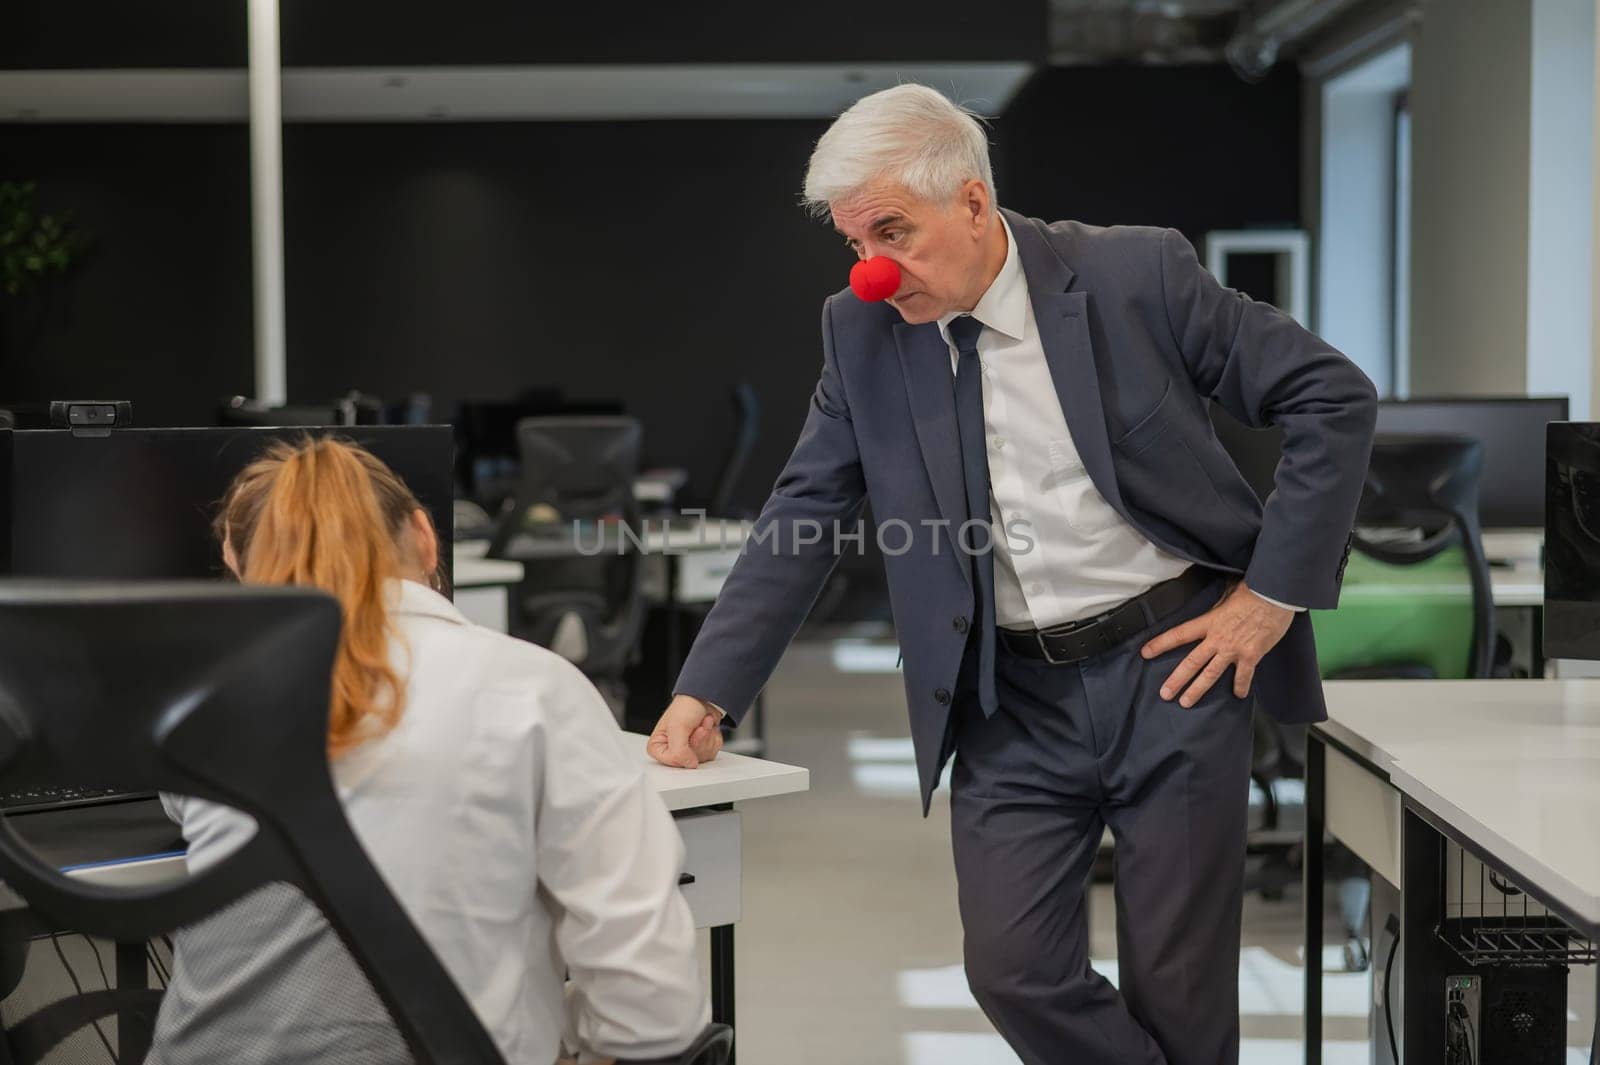 Elderly Caucasian man wearing a clown nose swears at his subordinate in the office